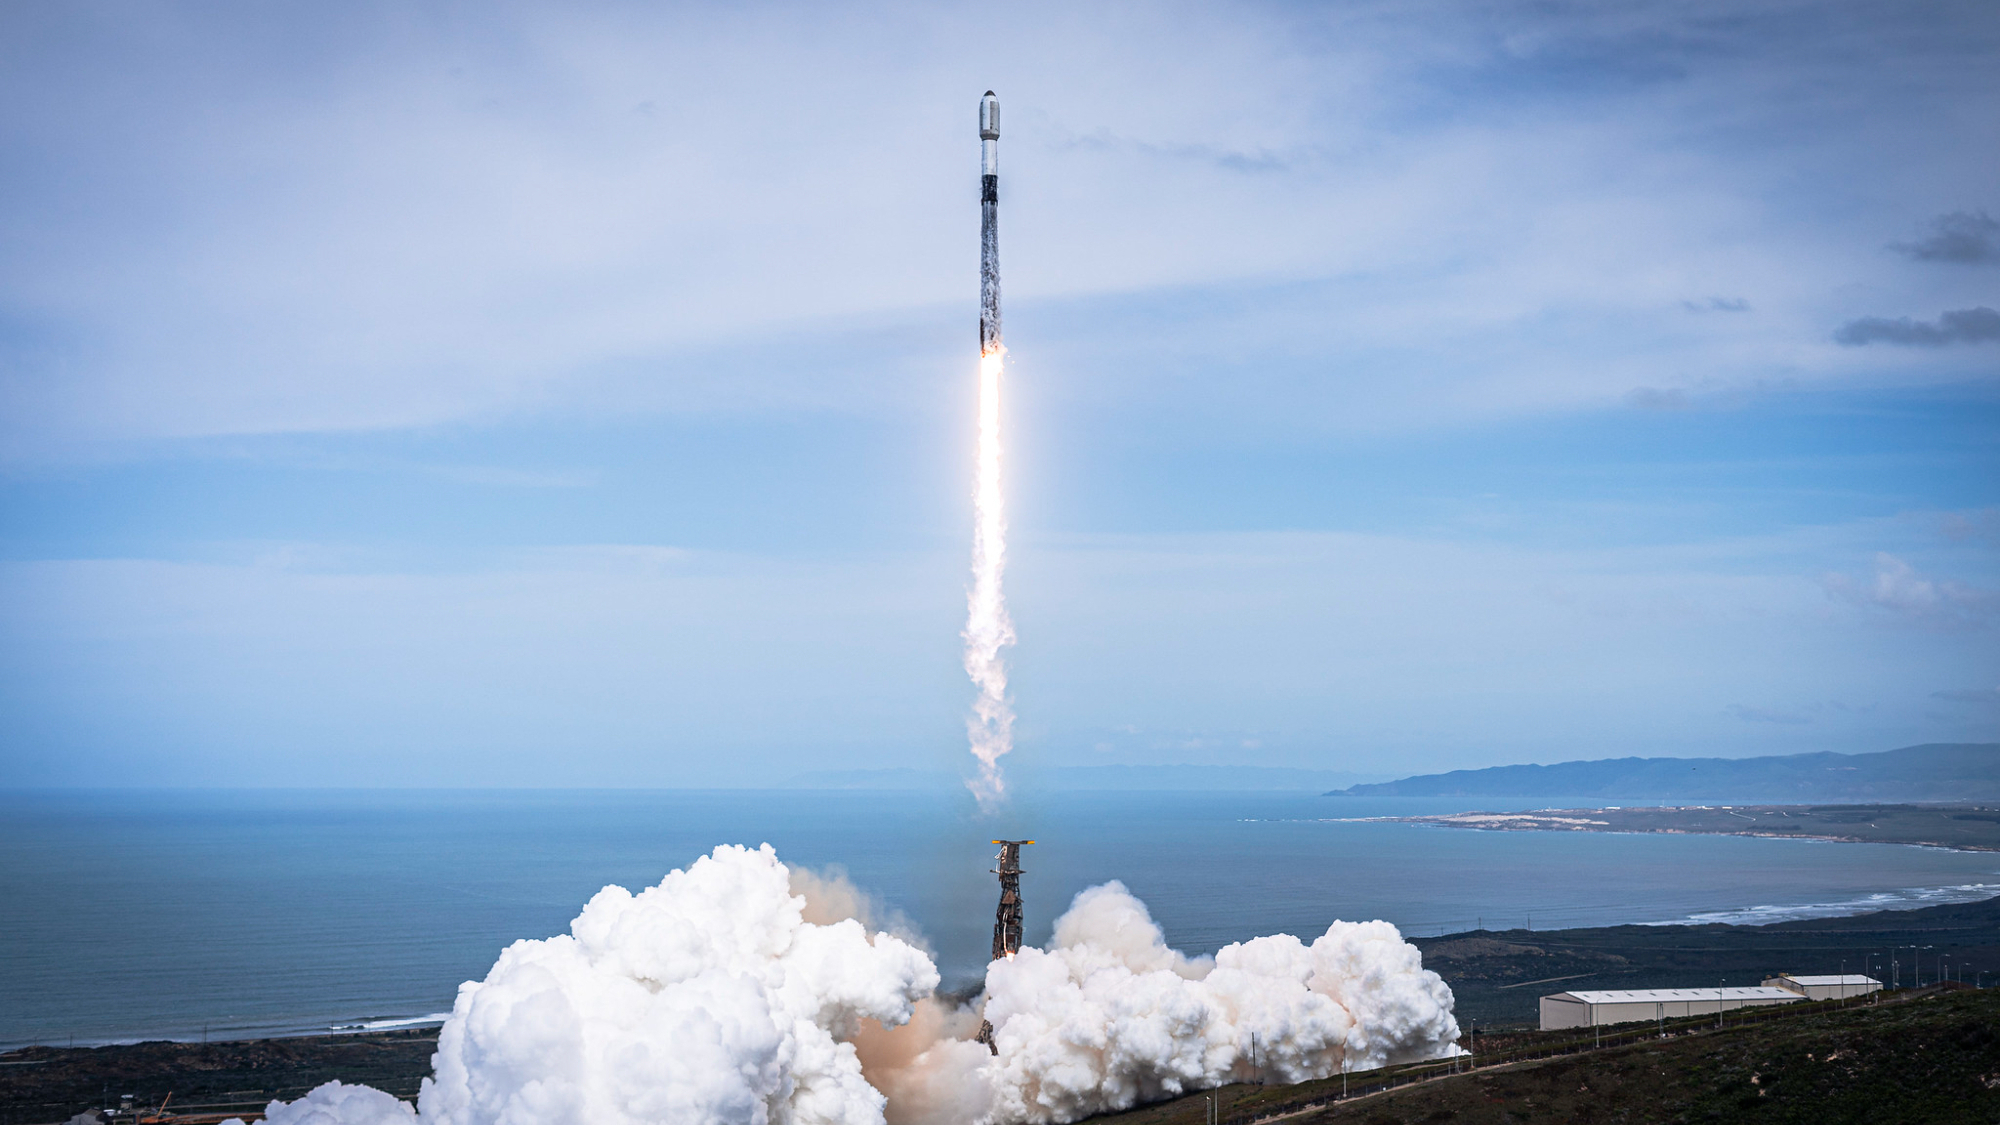 Spaceflight tripleheader! SpaceX planning 3 launches in 5-hour span today